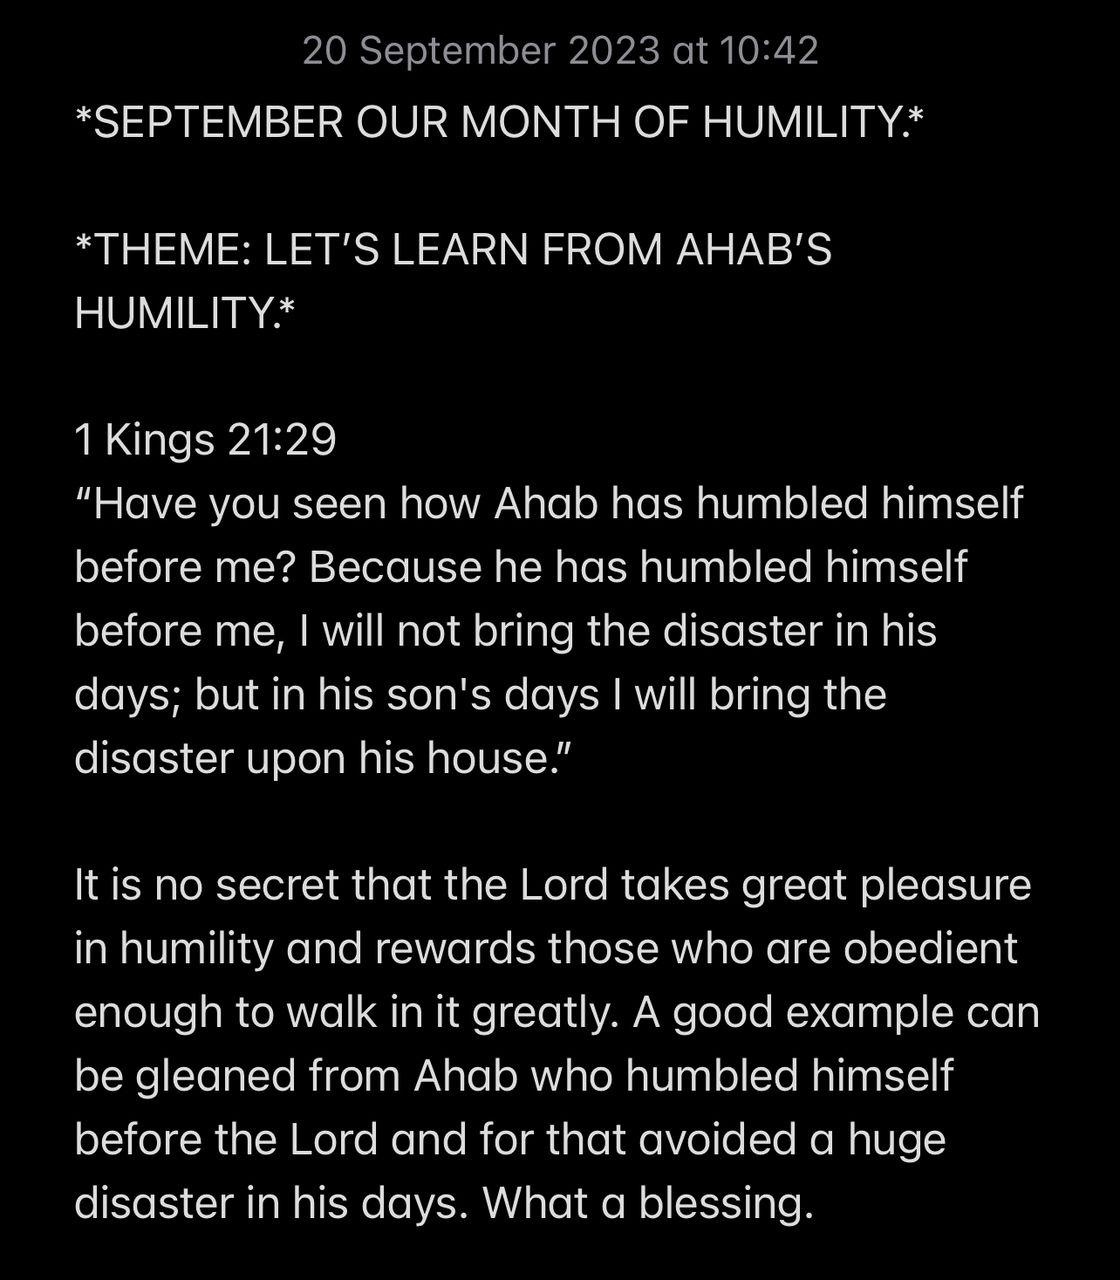 LET’S LEARN FROM AHAB’S HUMILITY.